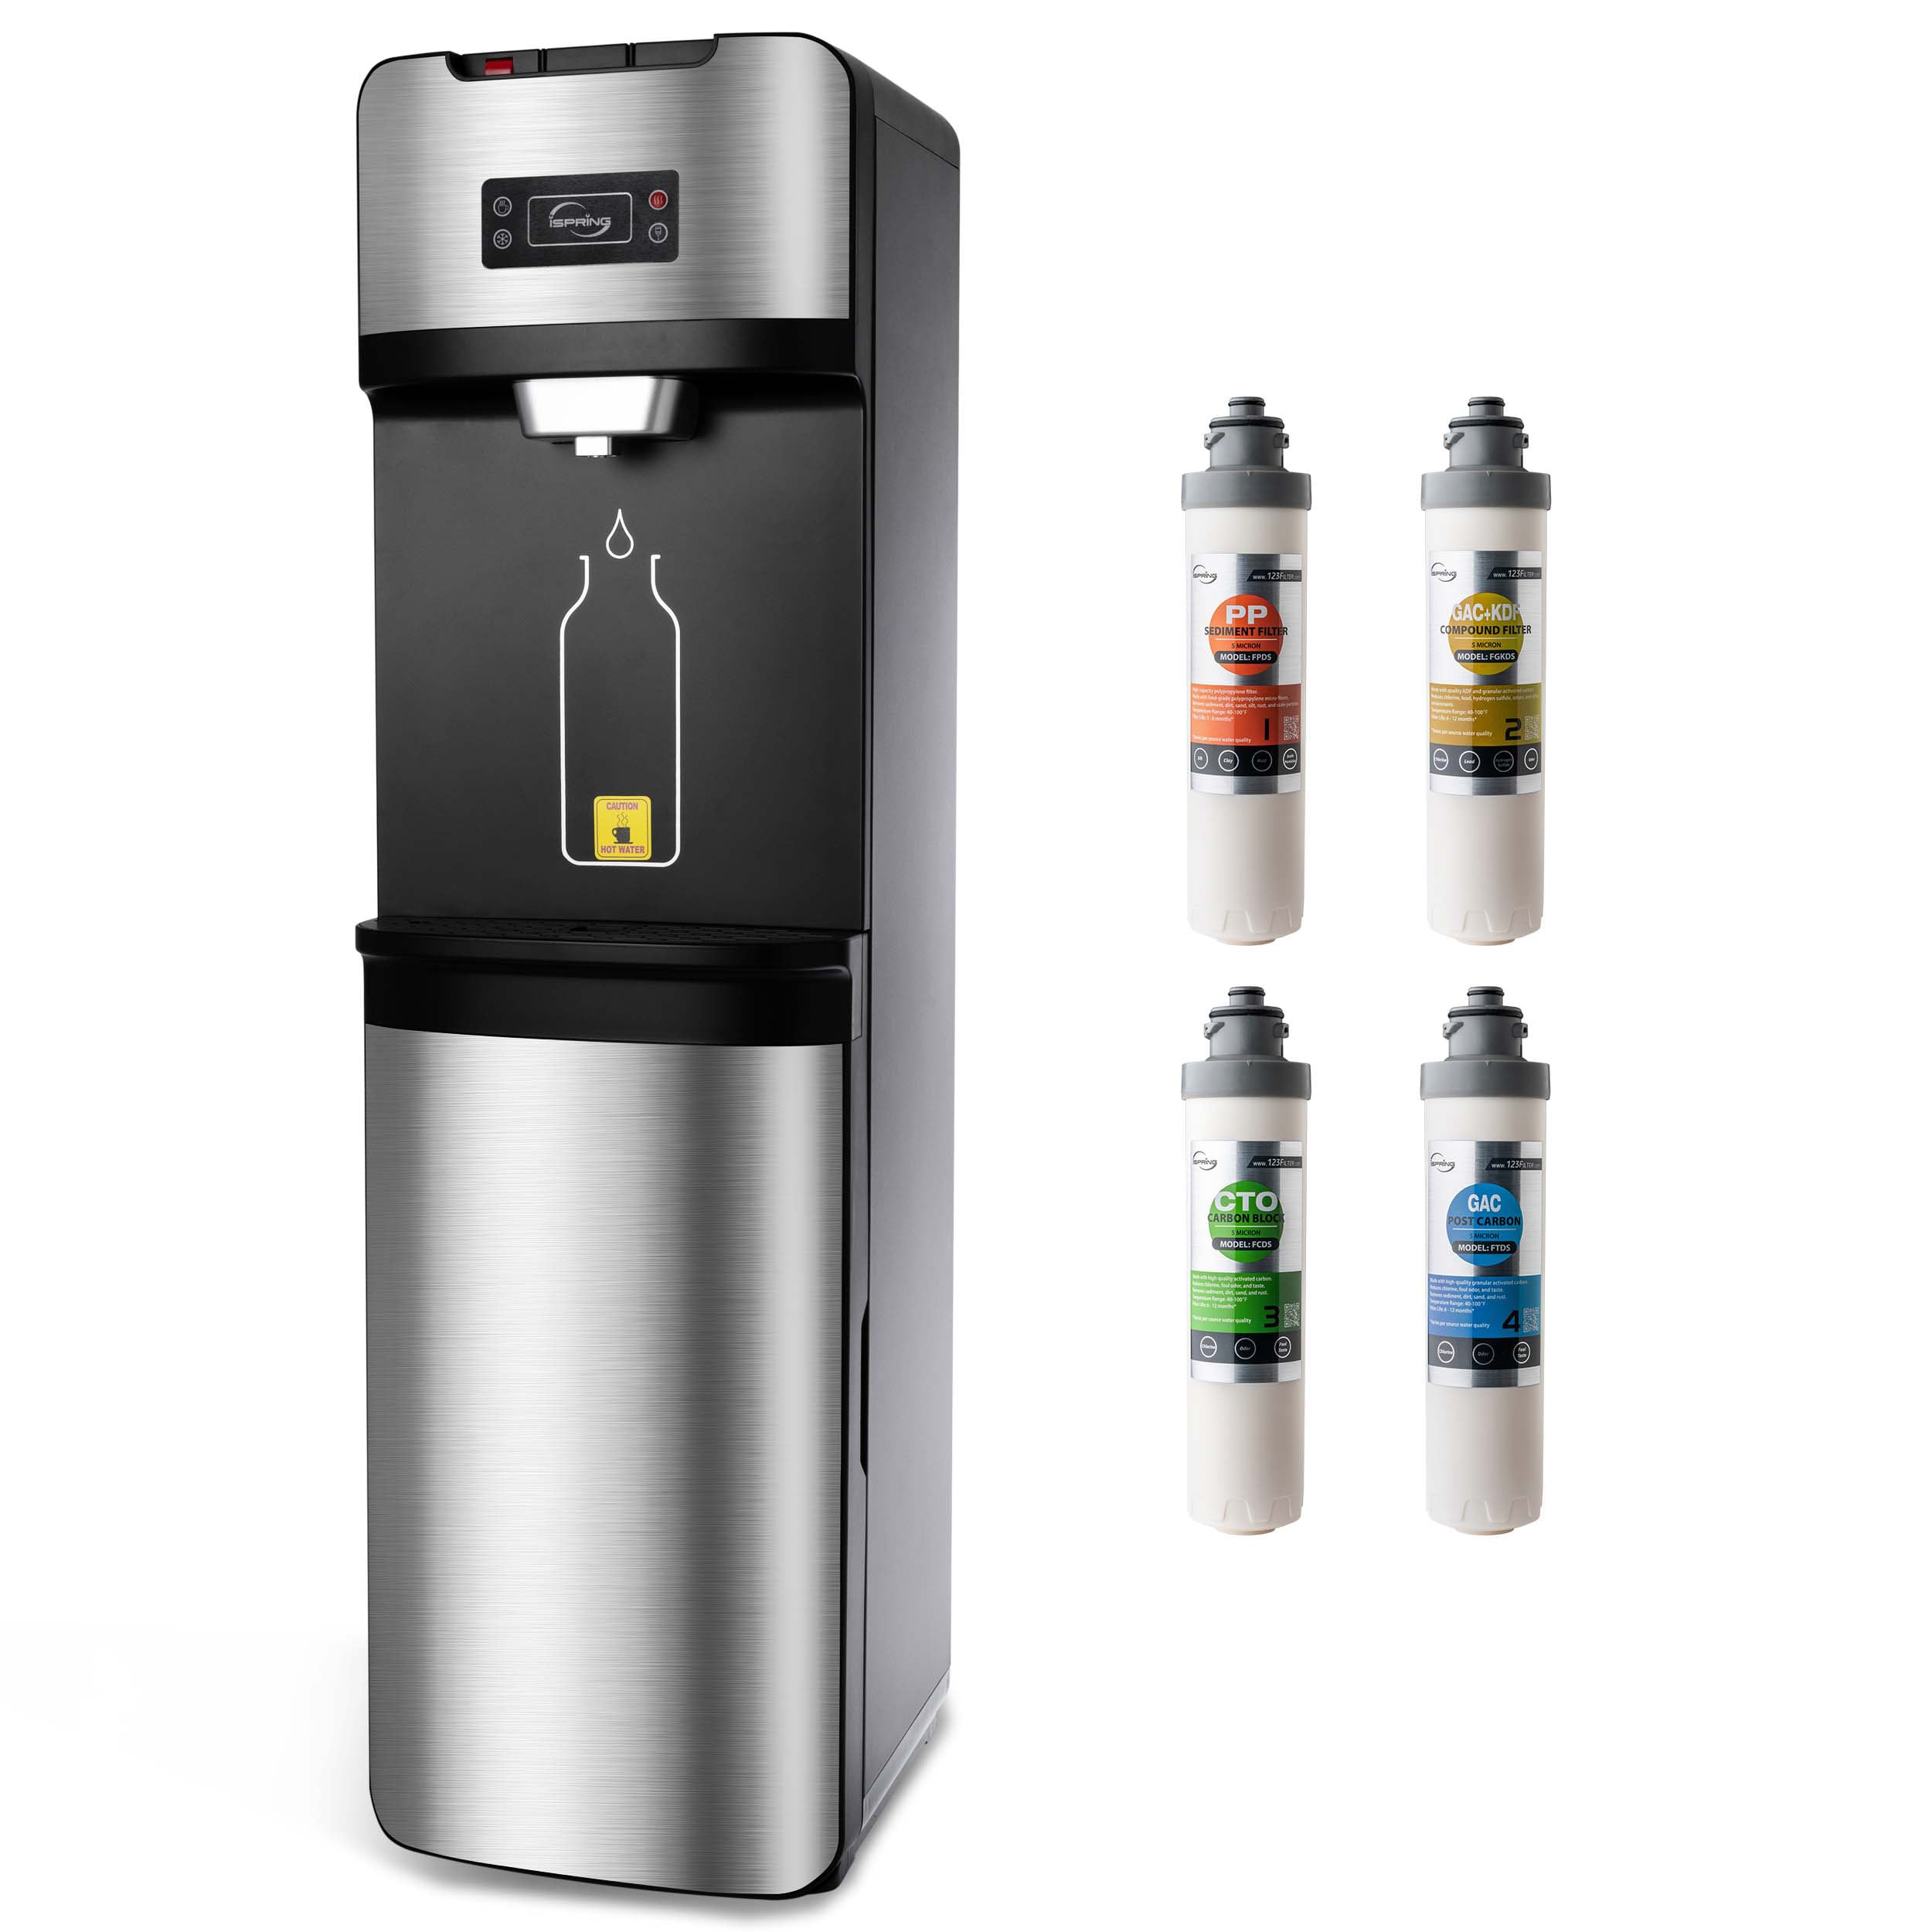 iSpring Freestanding Built-In Water Filter Hot and Cold Water Dispenser